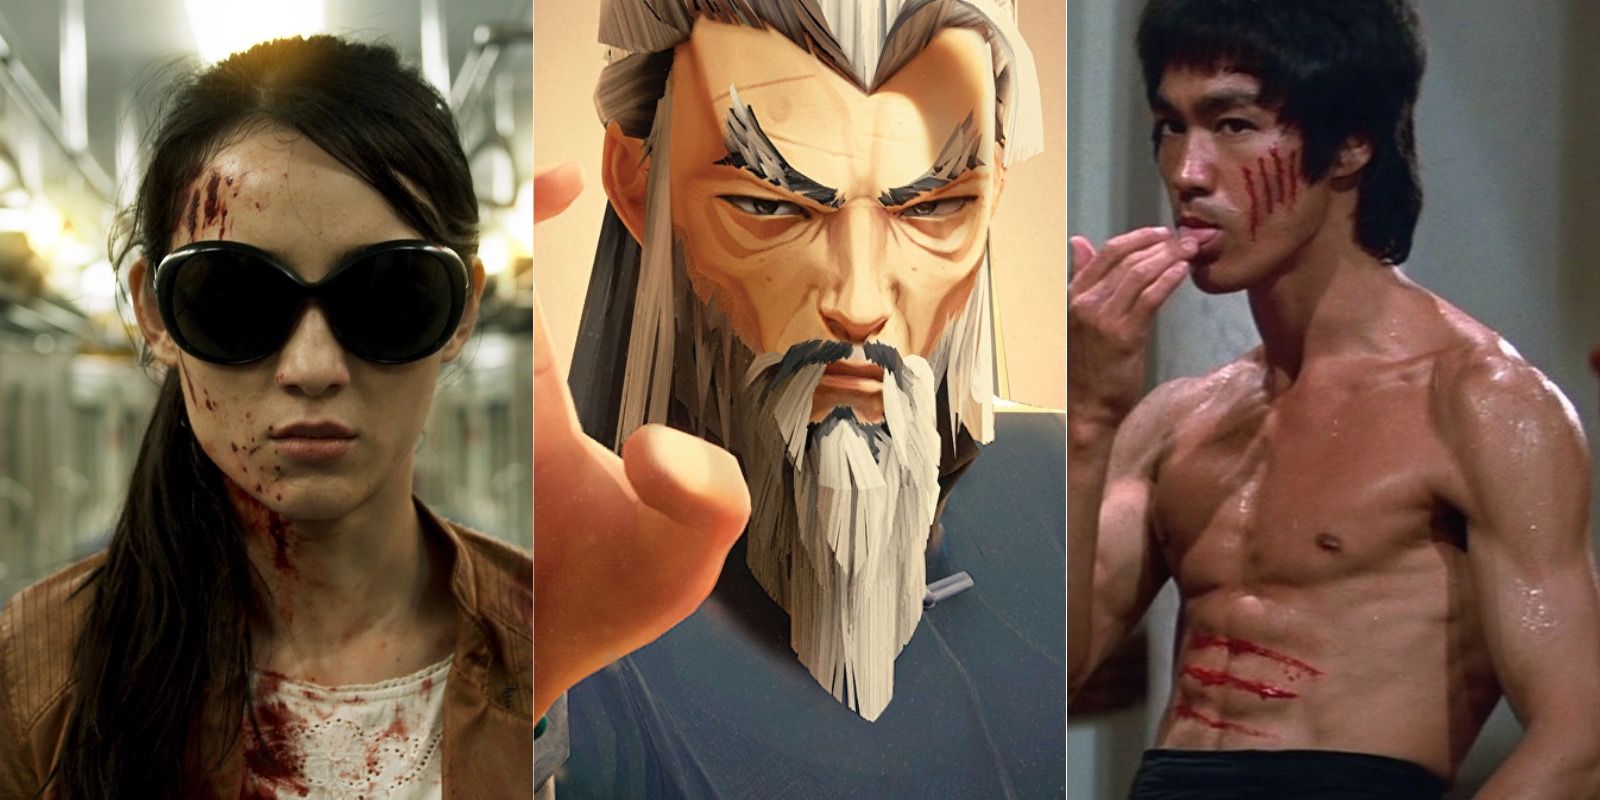 Image of Hammer Girl from the Raid 2, The student from Sifu and Bruce Lee in Enter The Dragon